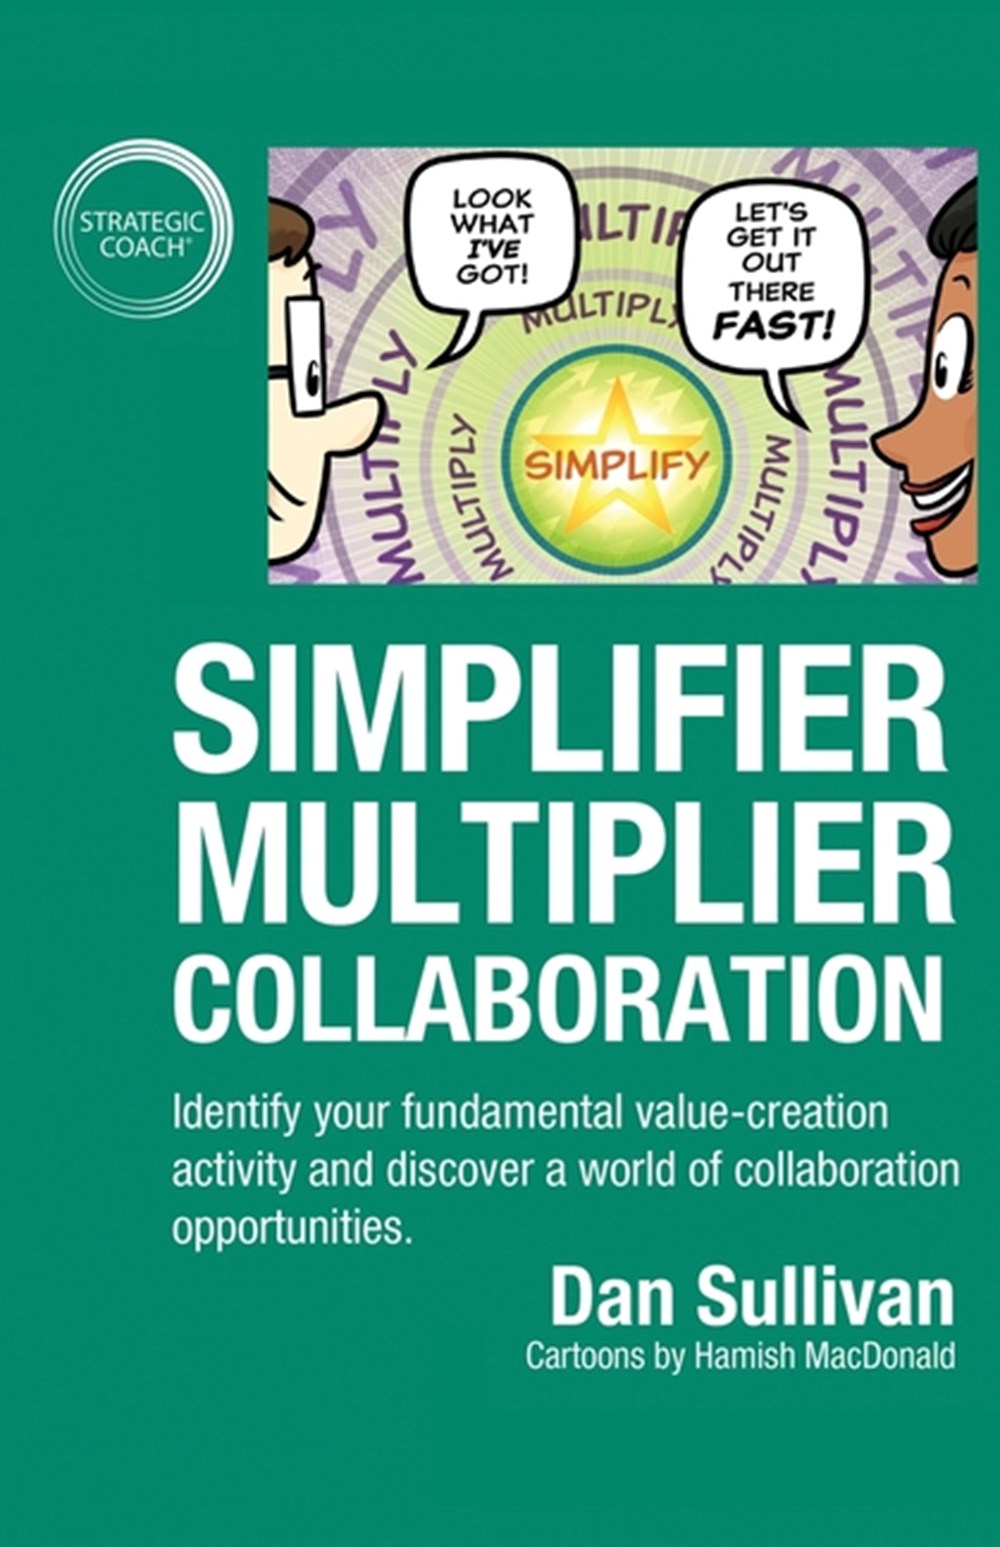 Simplifier-Multiplier Collaboration: Identify your fundamental value-creation activity and discover 